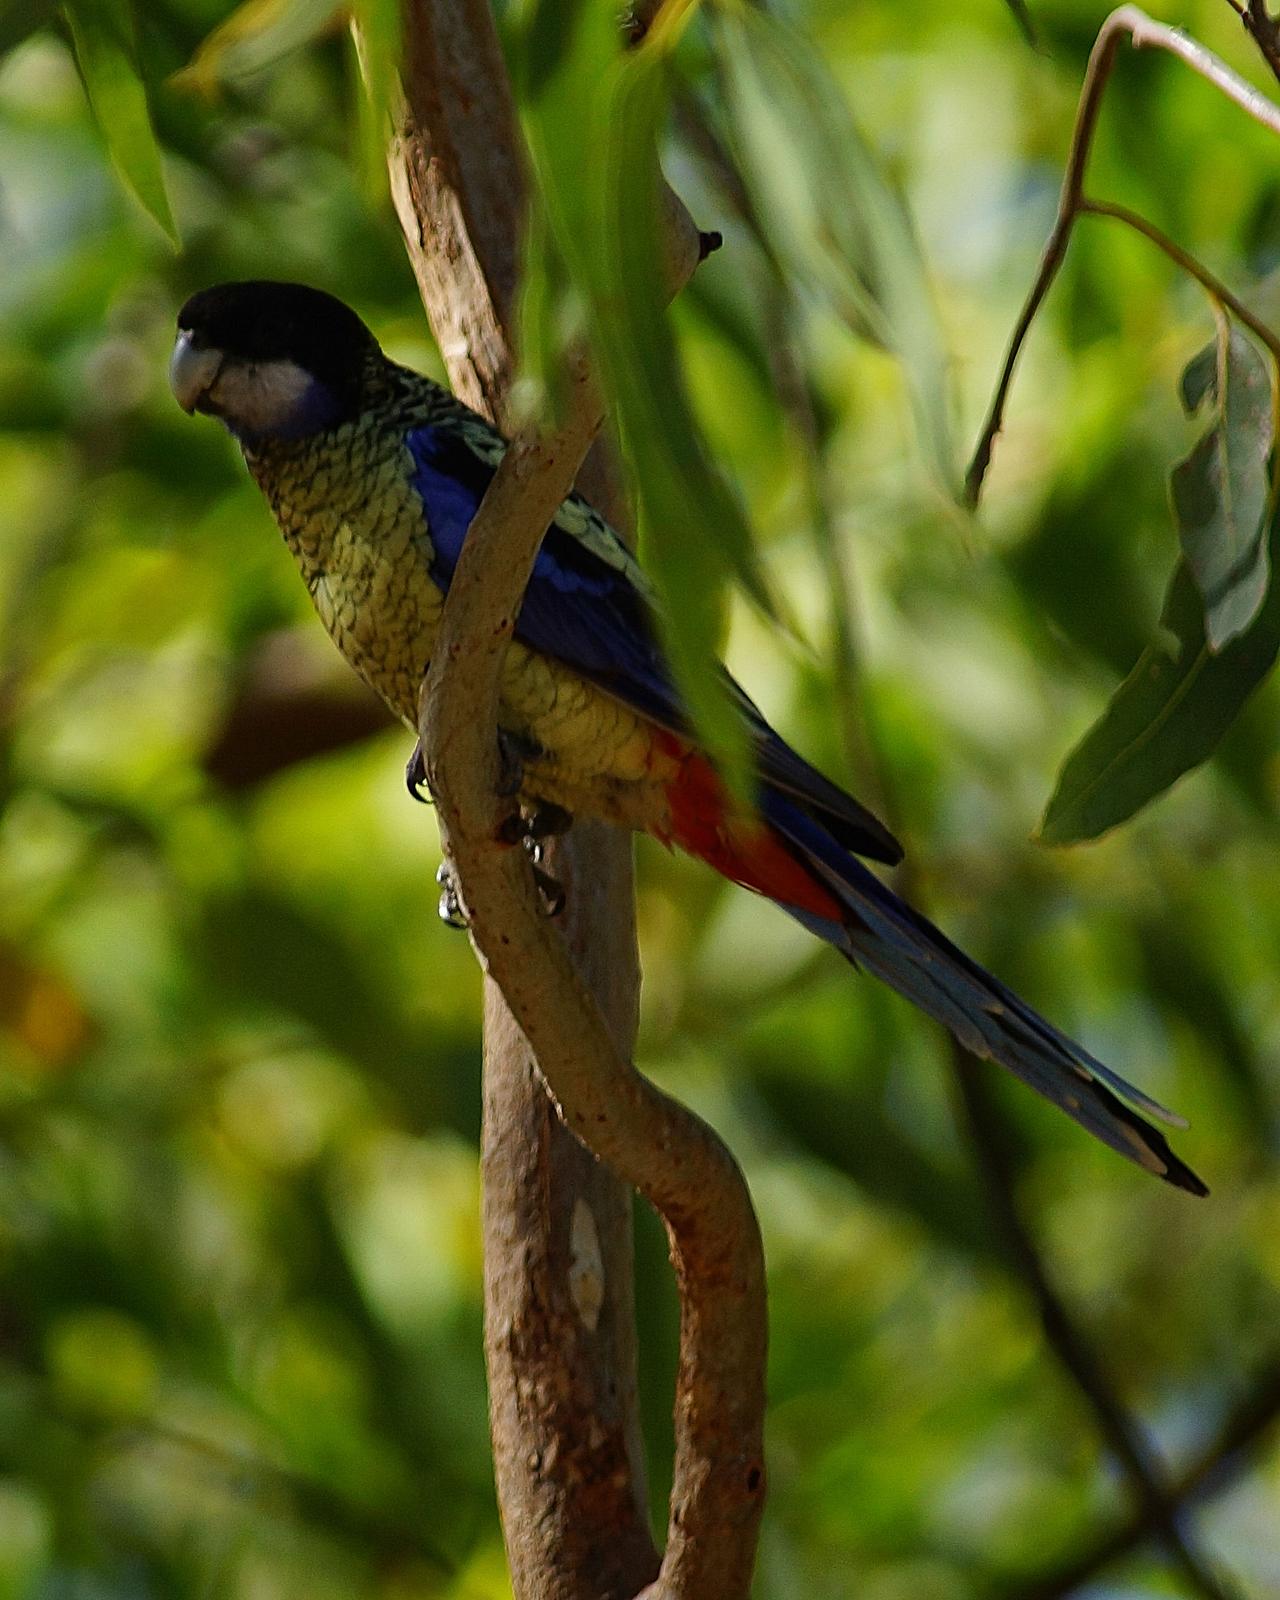 Northern Rosella Photo by Steve Percival